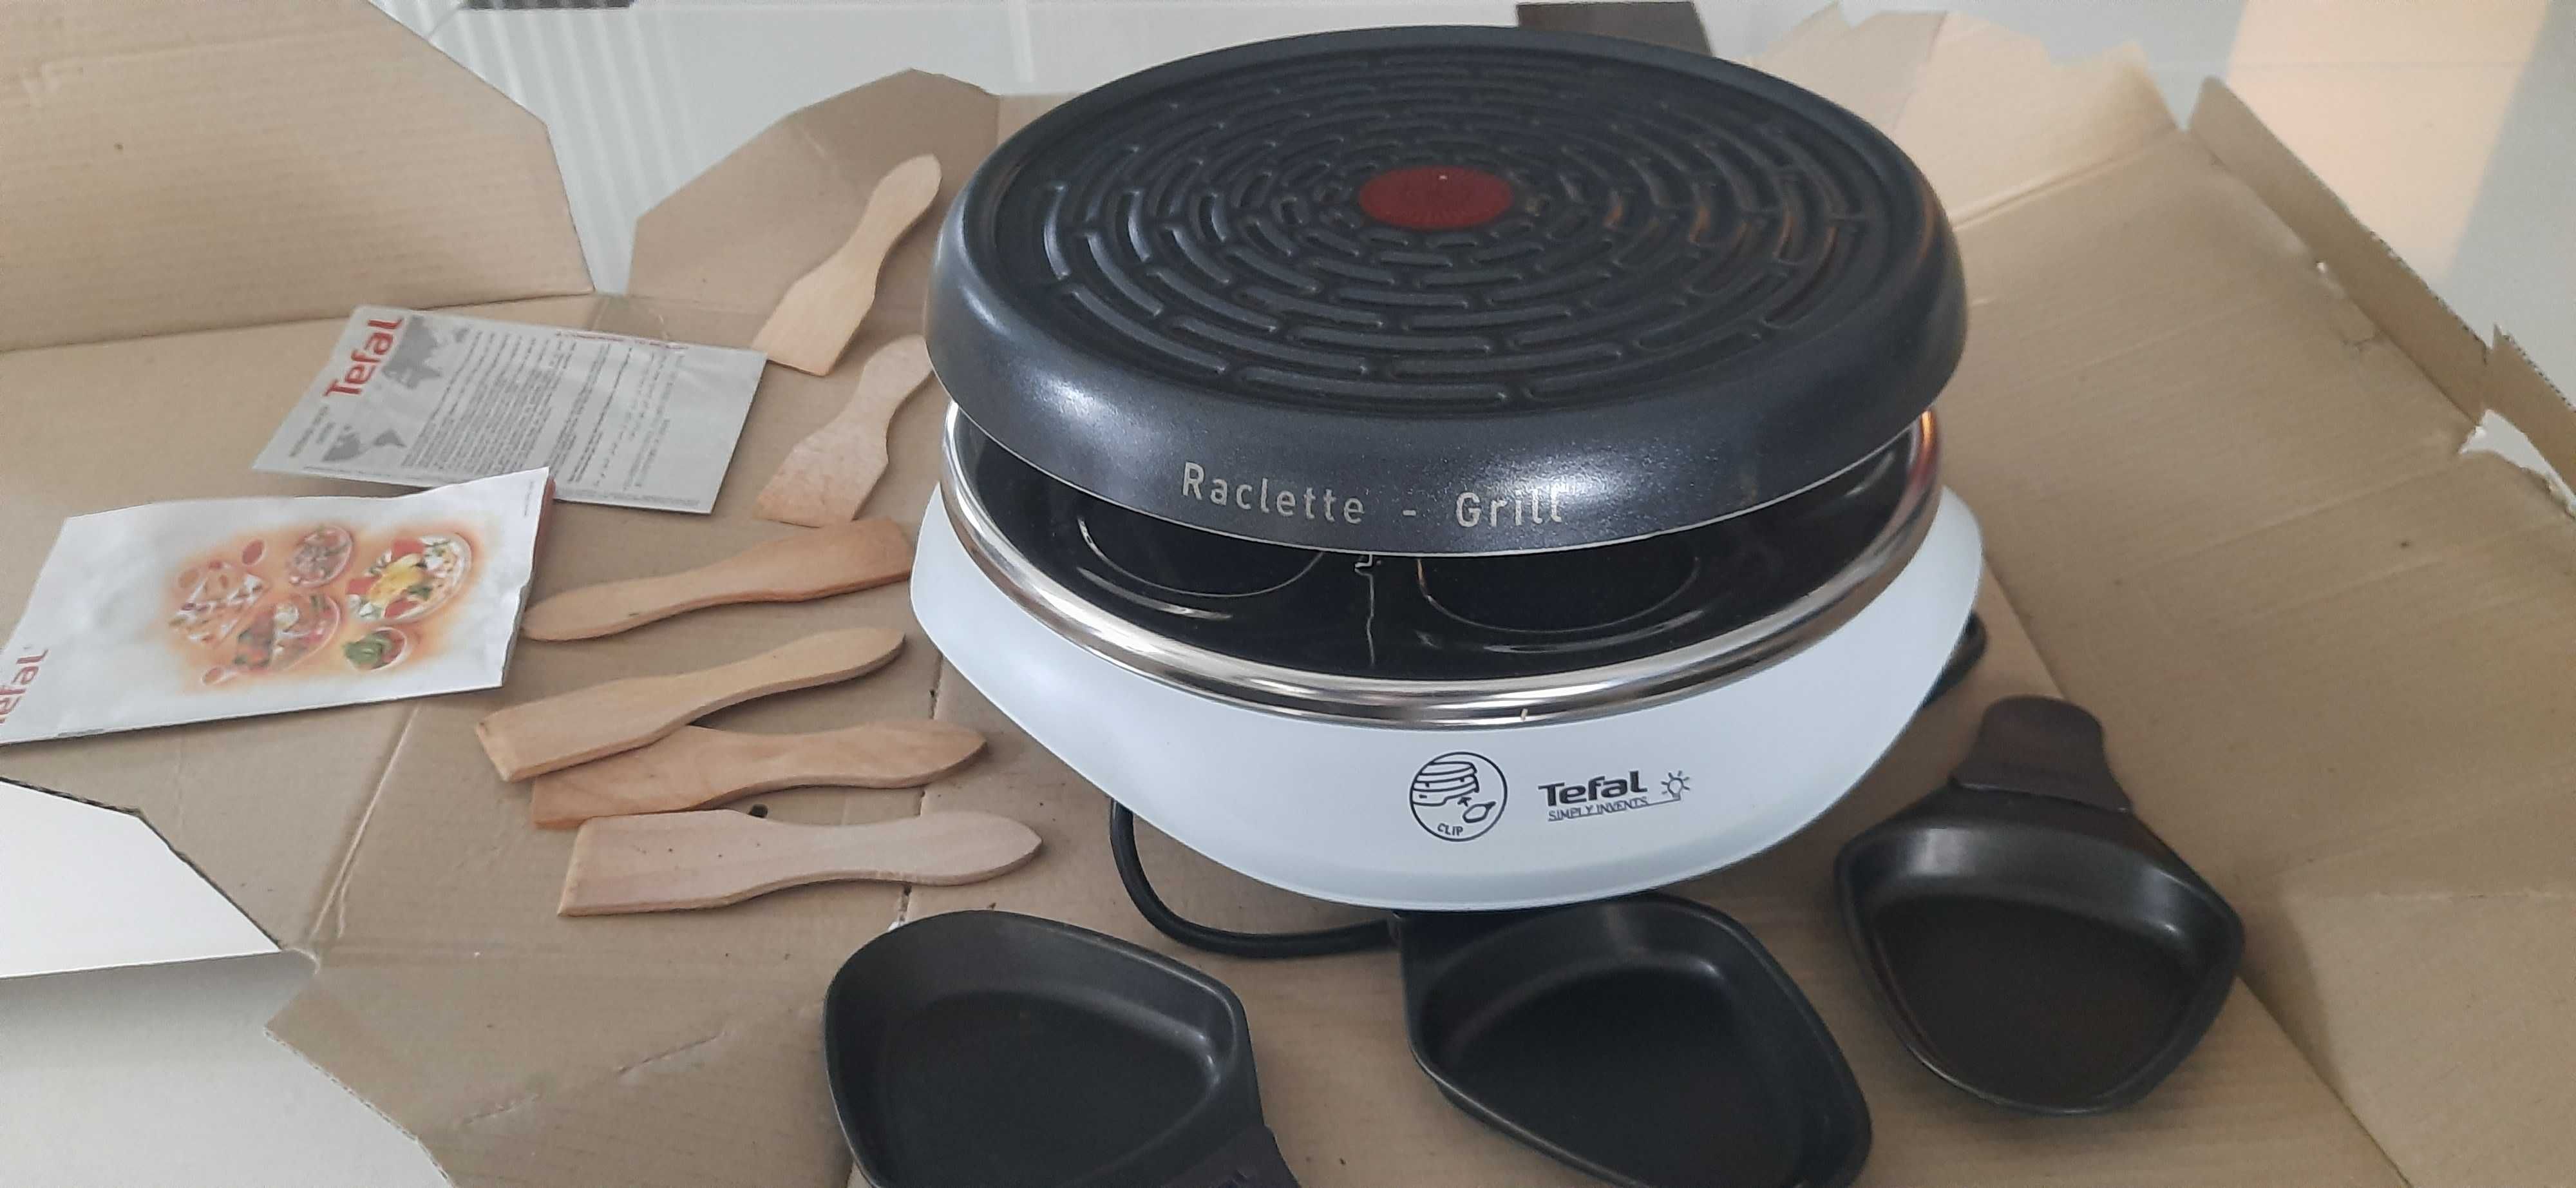 Grill raclette Tefal